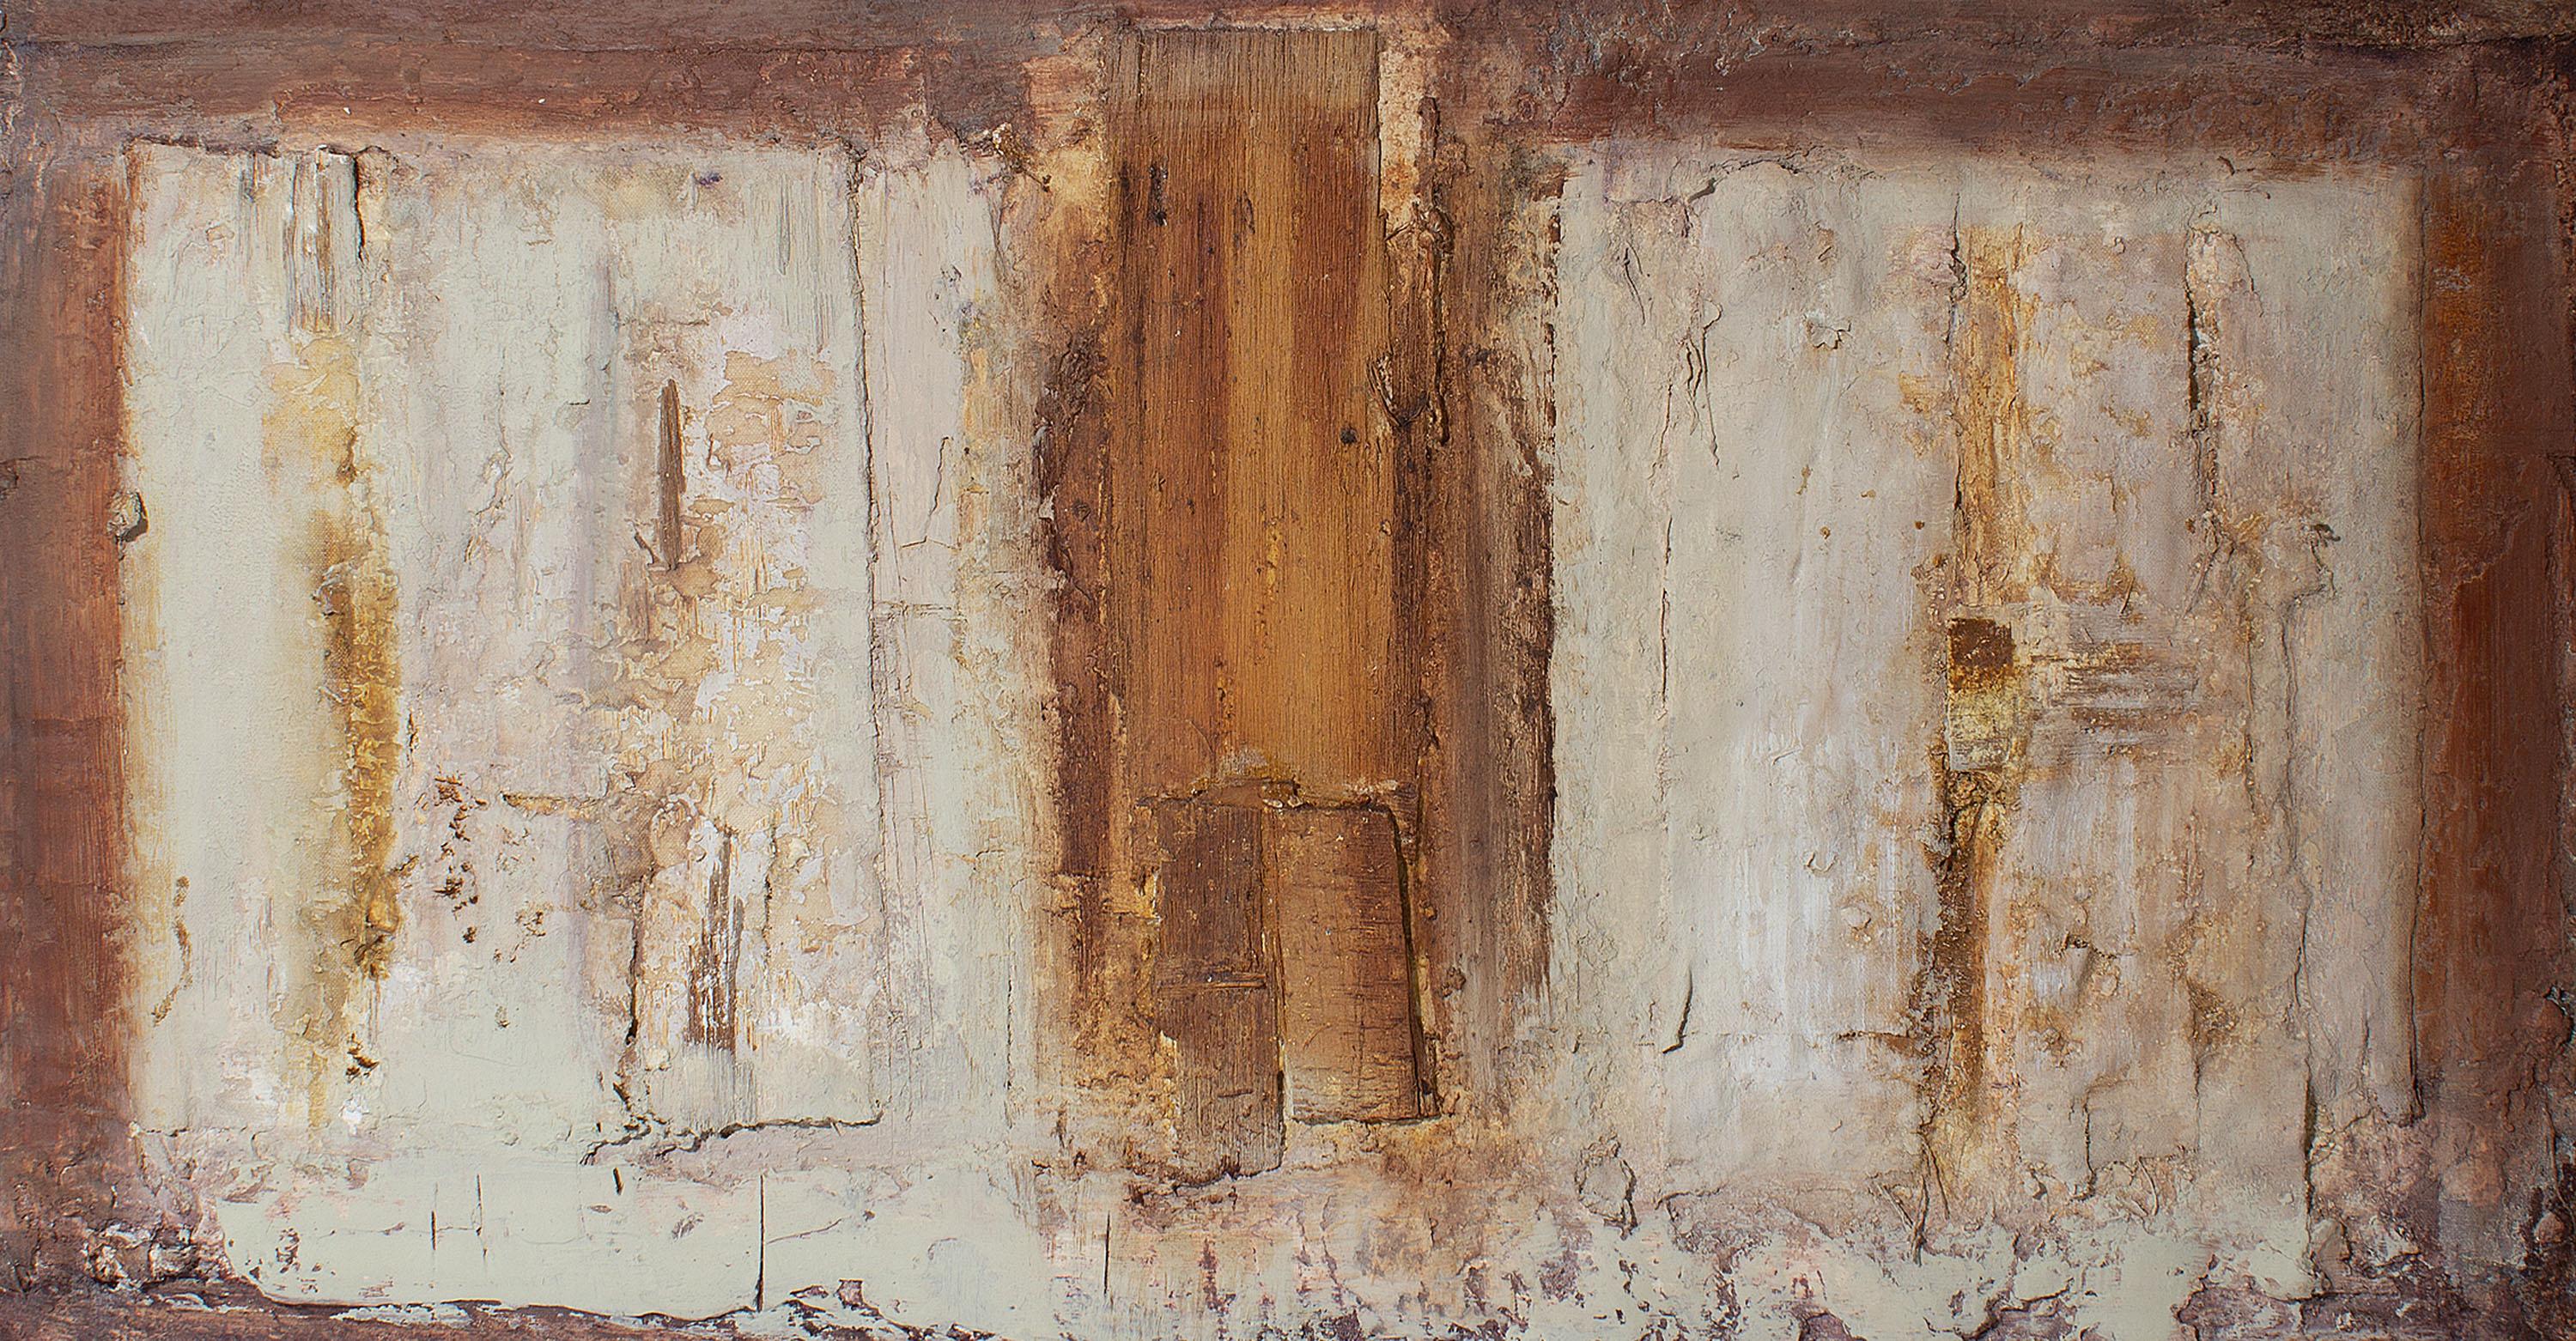 A 1997 mixed media wall assemblage titled, Suma VI by the American artist Juliet Holland (1937-2017). A palimpsest of paint, canvas, and wood is created in this work. A dark rose background is contrasted by an off-white rectangular design. A brown